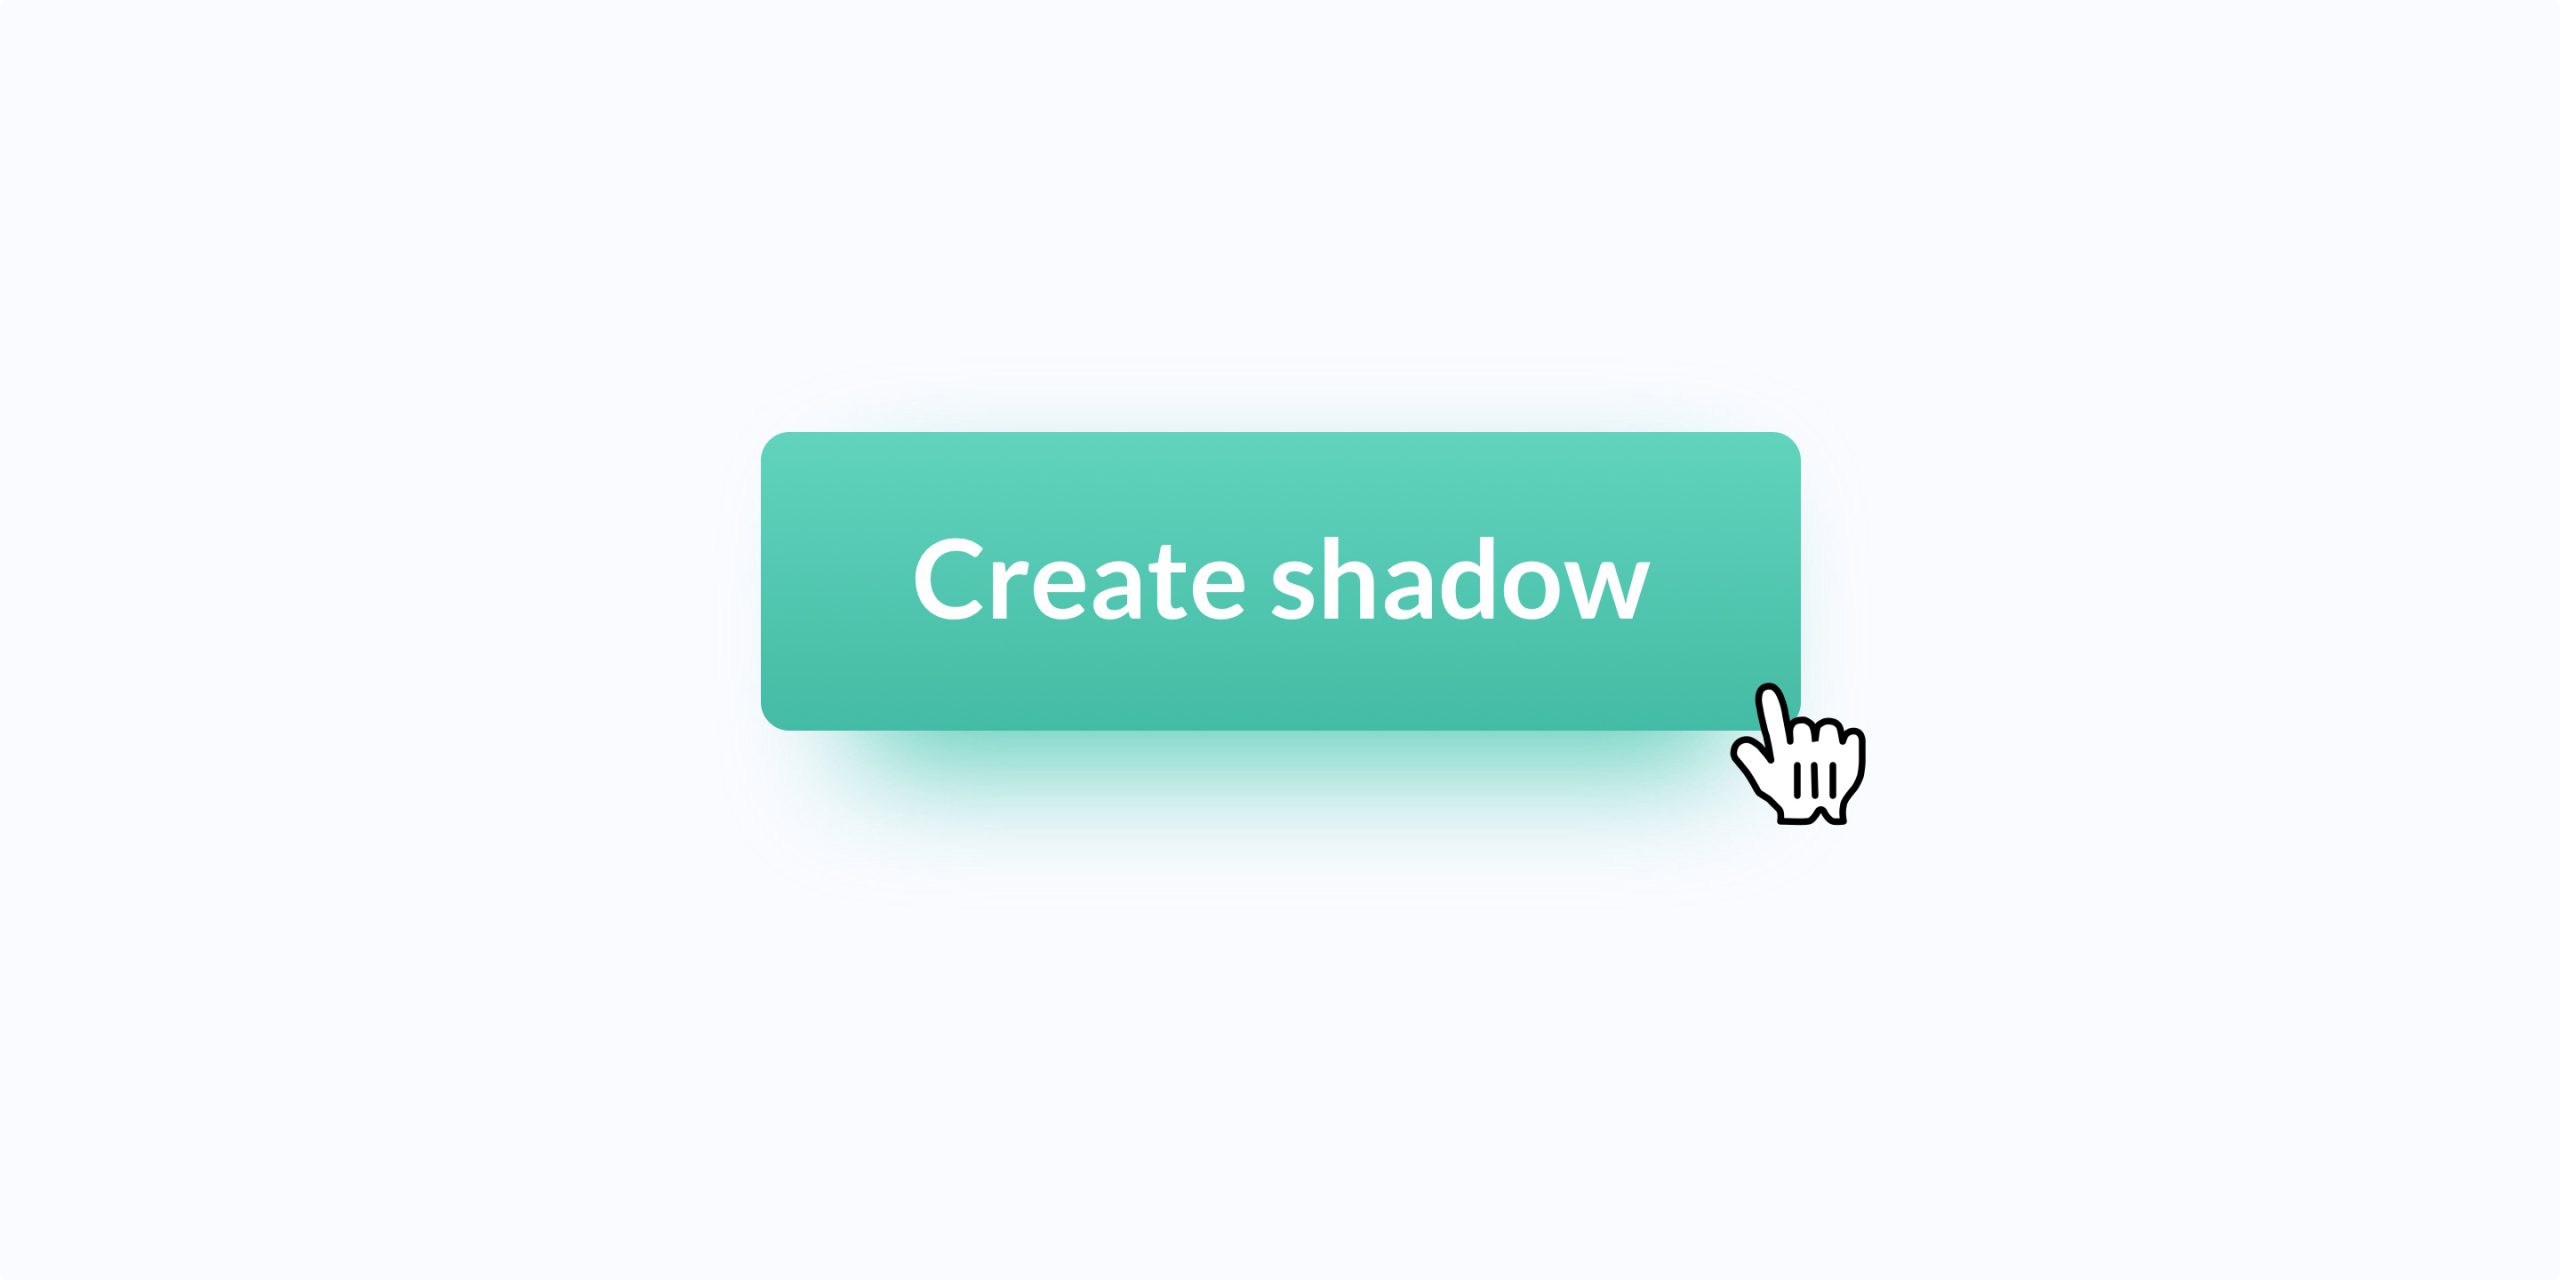 How to use shadows in UI design